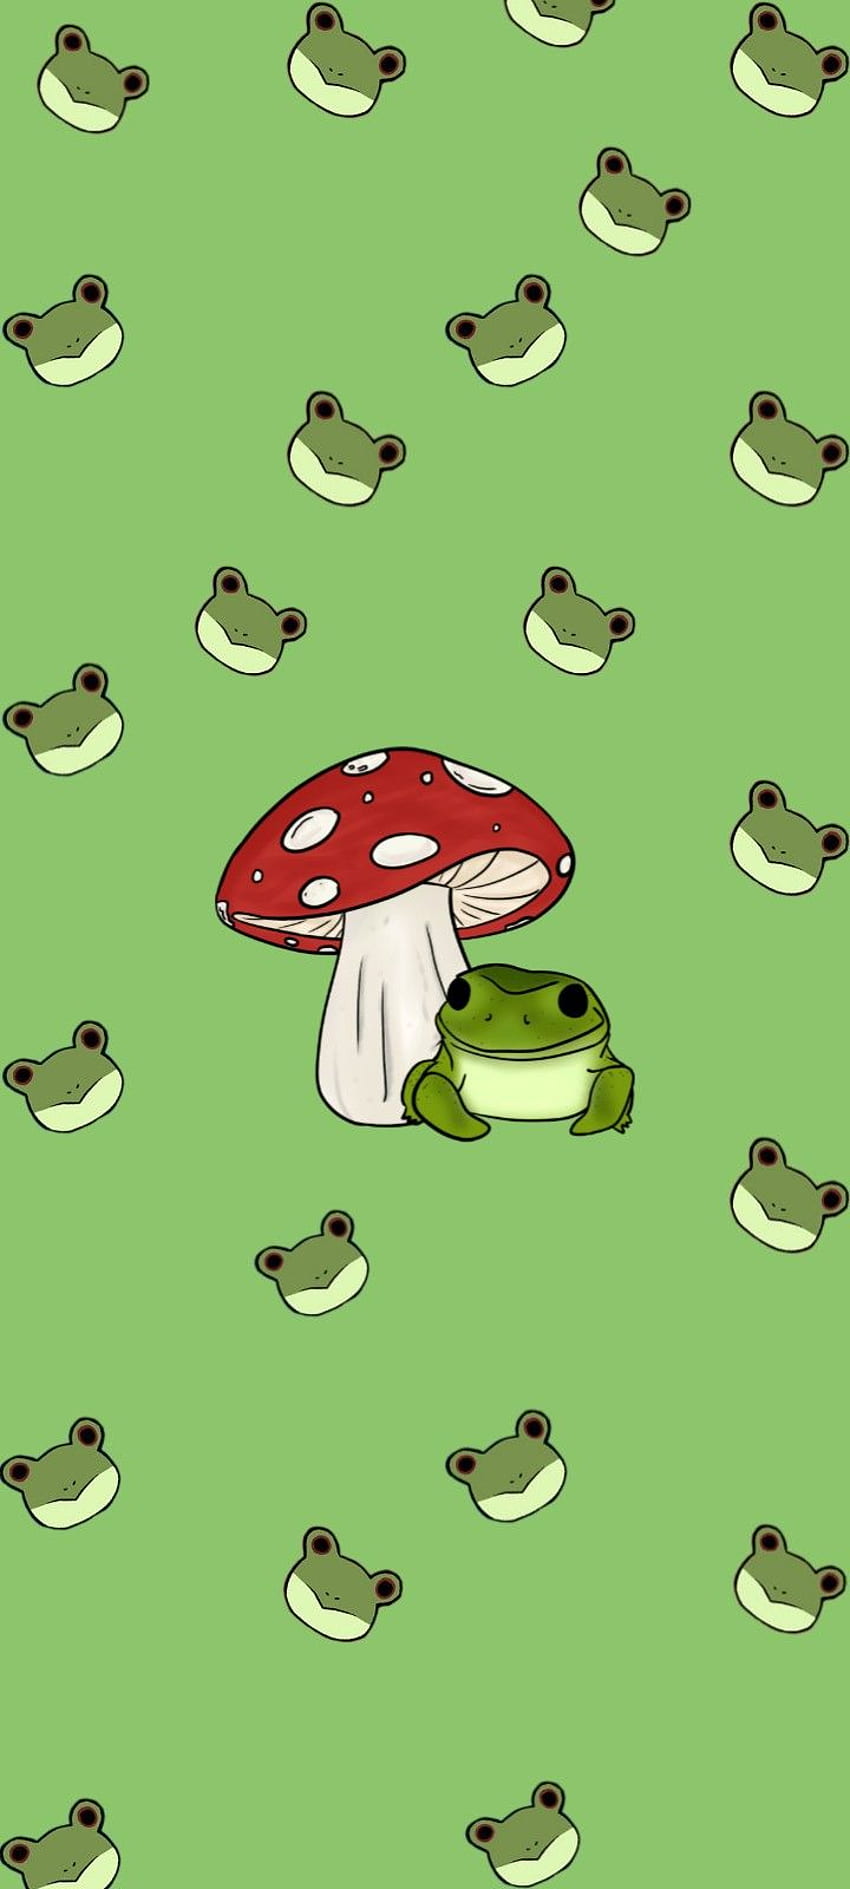 Cute Frog wallpaper   luscageeks Kofi Shop  Kofi  Where creators  get support from fans through donations memberships shop sales and more  The original Buy Me a Coffee Page